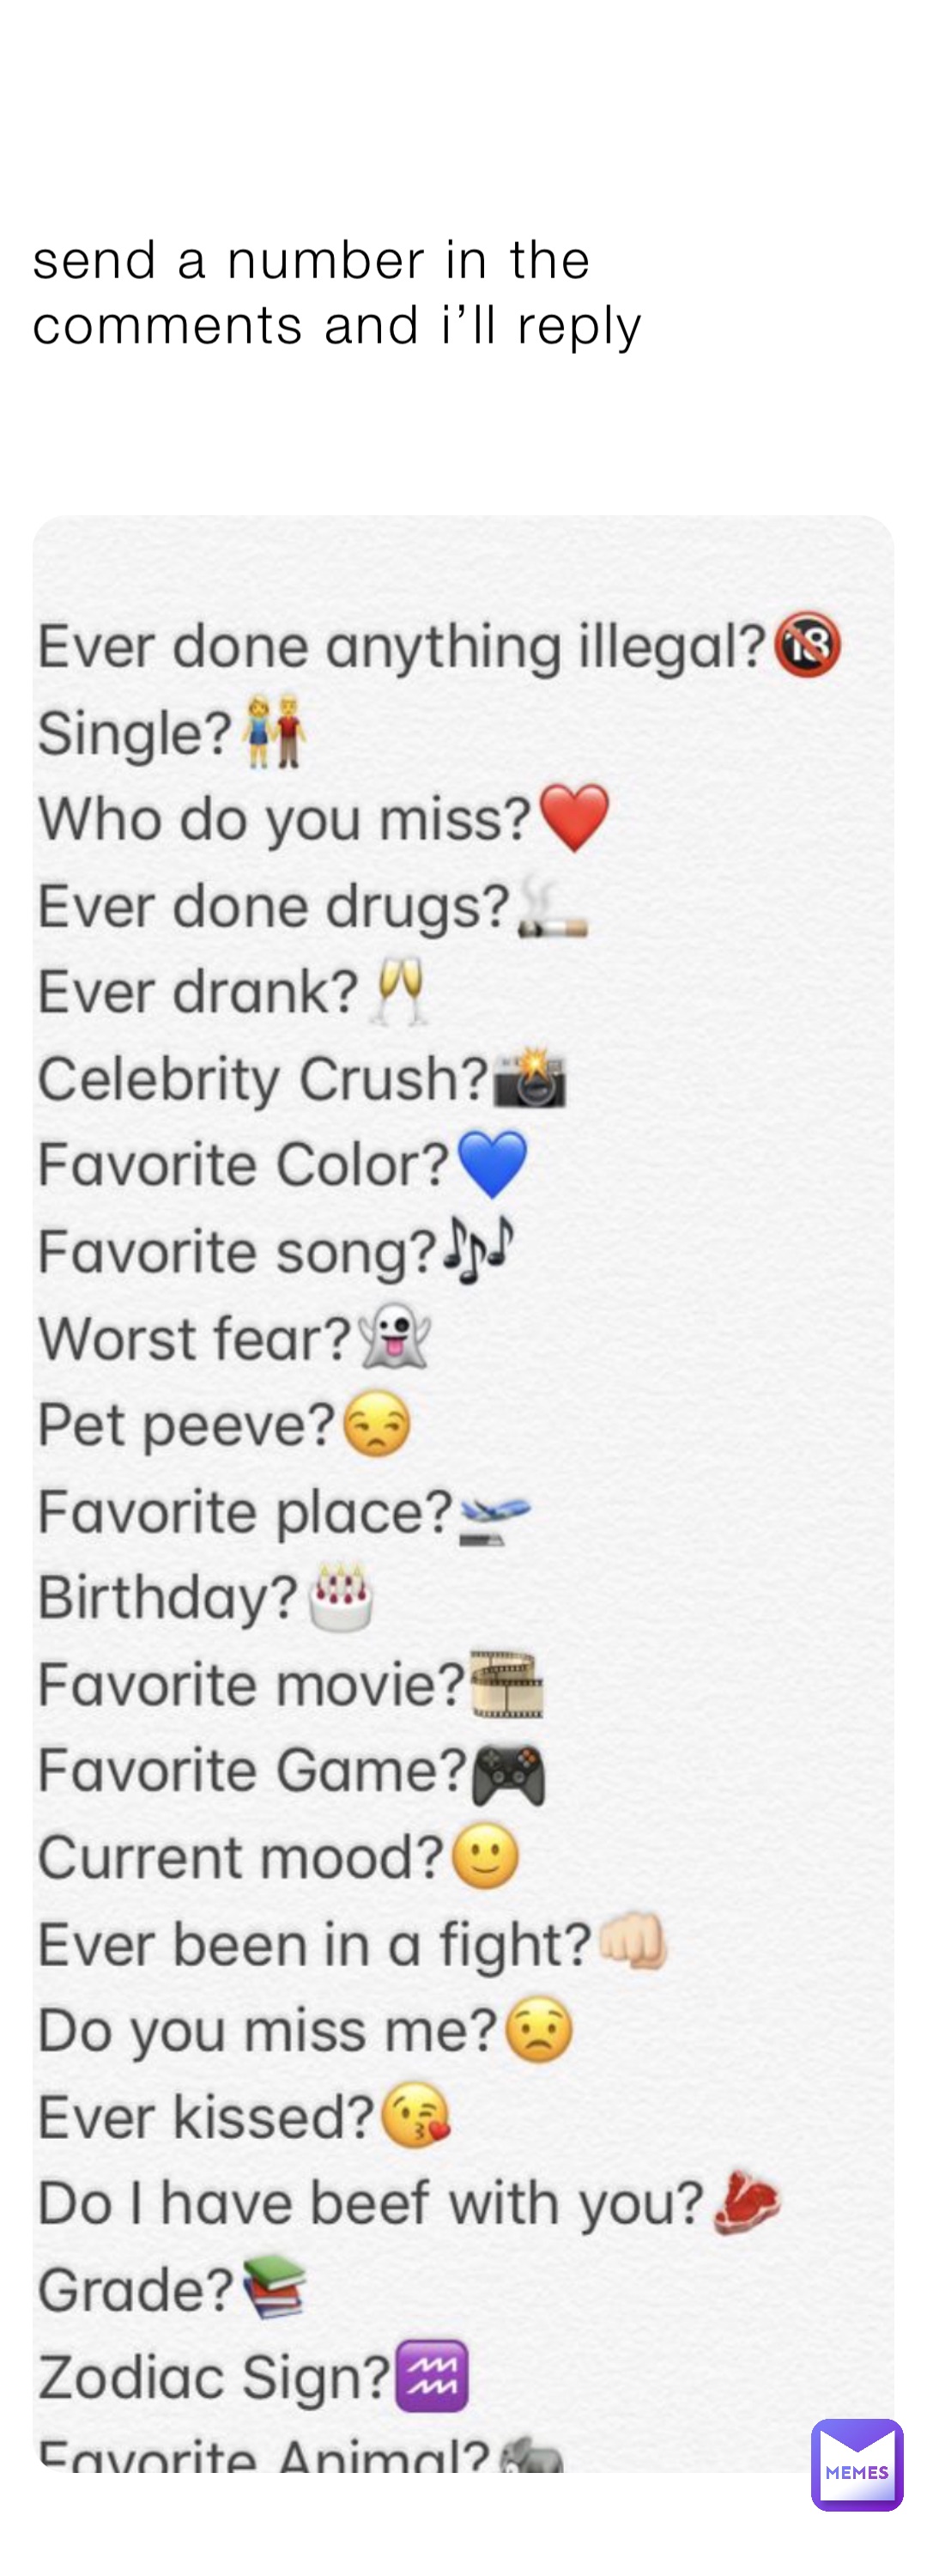 send a number in the comments and i’ll reply